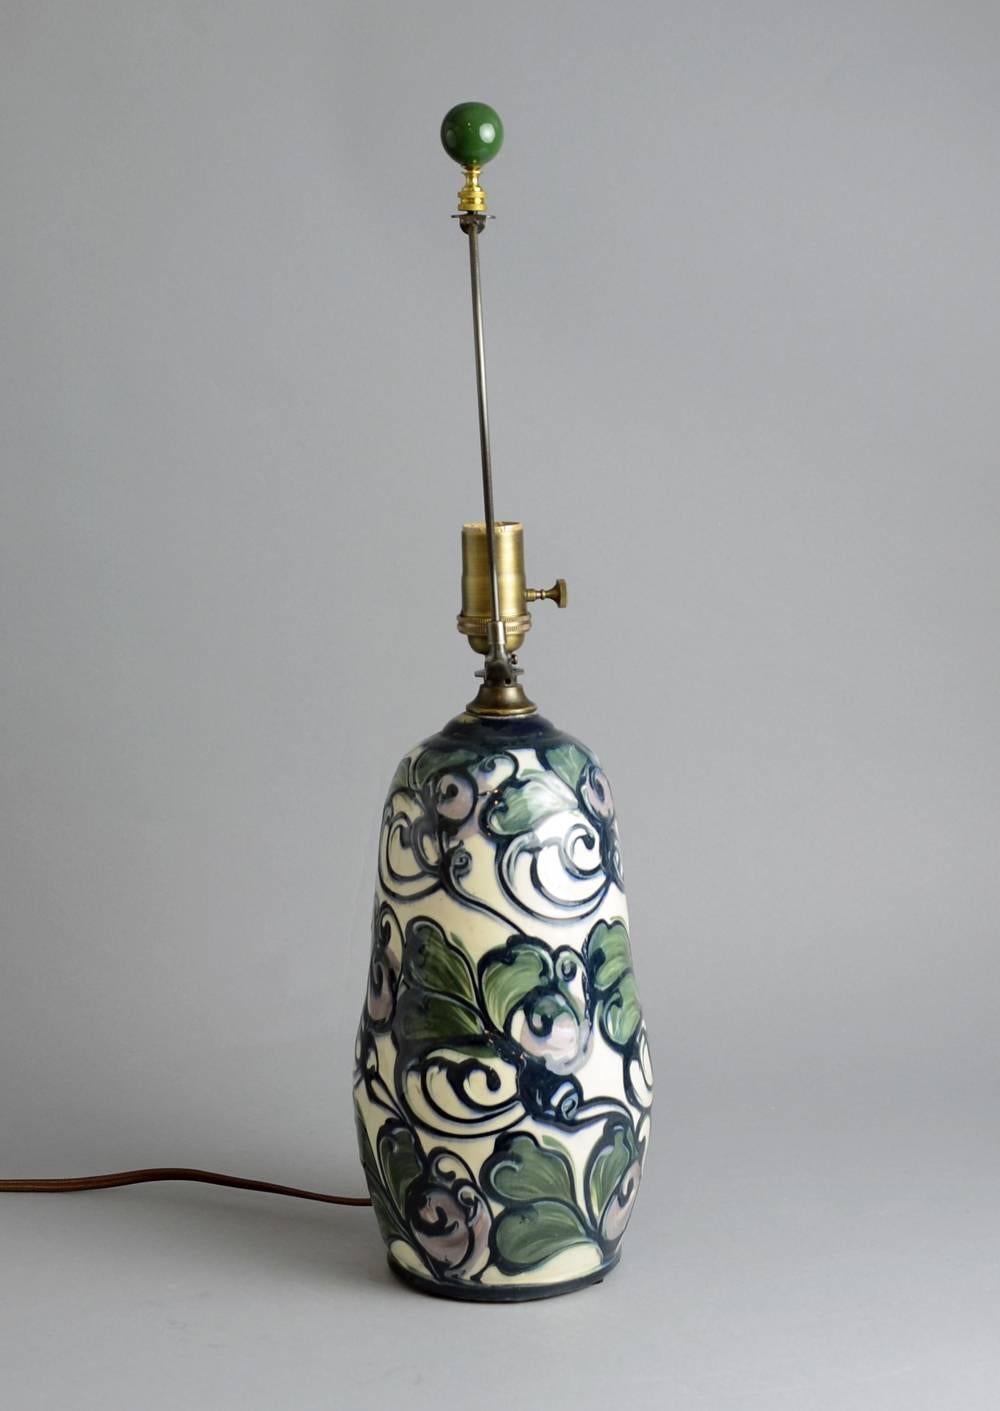 Danish Ceramic Lamp by Sofie Lundstein for Herman a. Kahler Keramik, 1910s-1920s For Sale